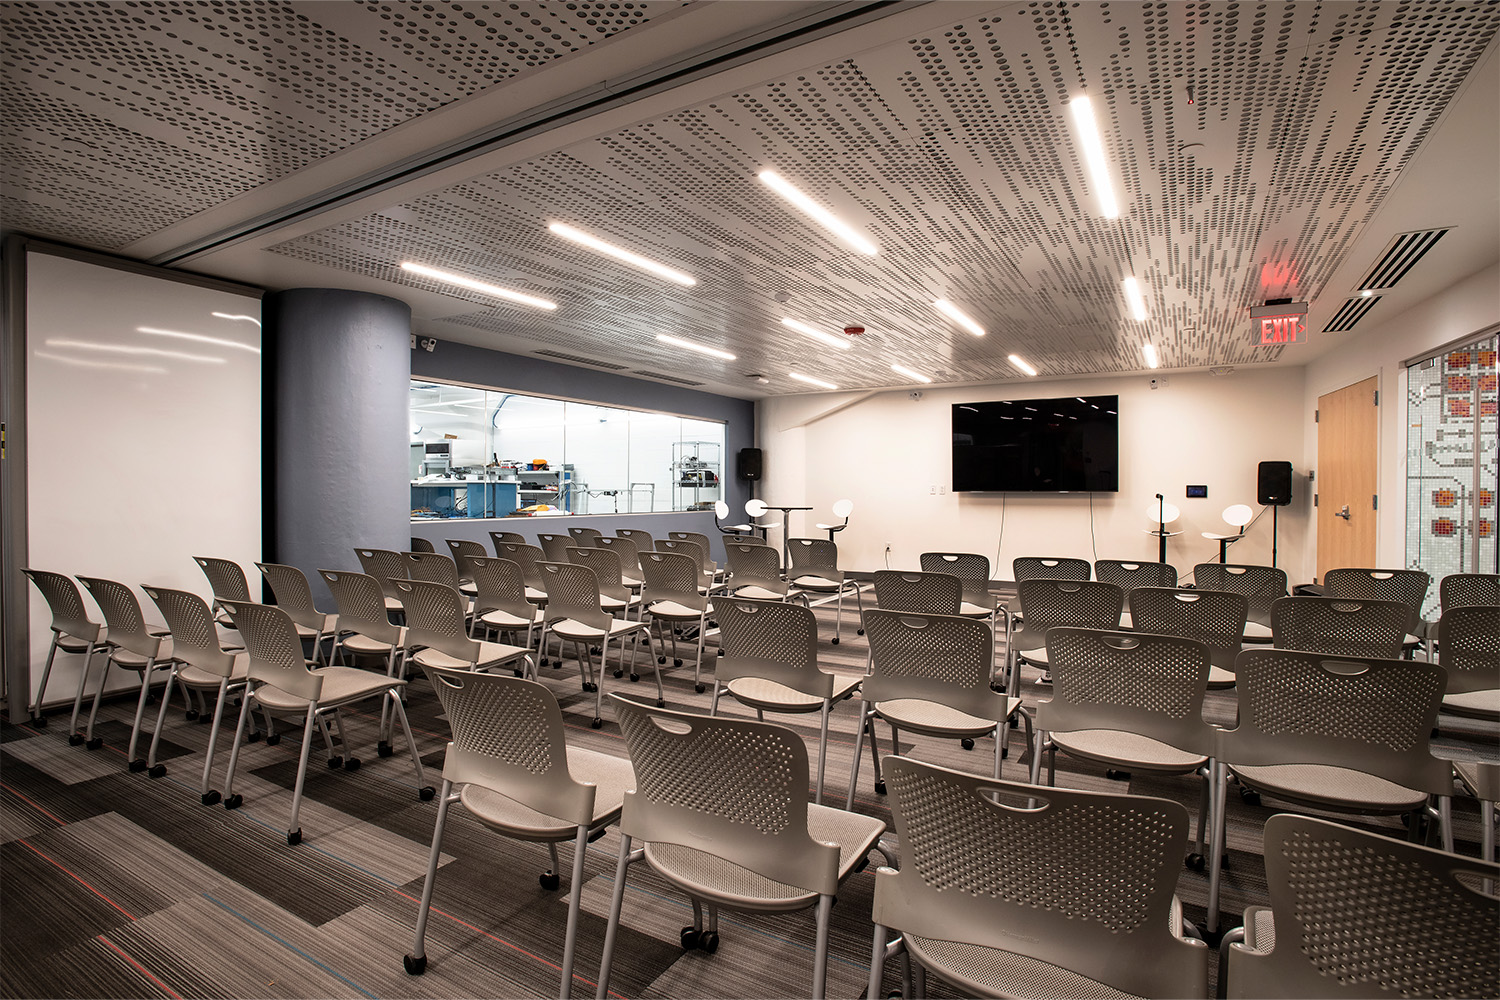 Conference room with rows of grey plastic chairs, TV mounted to wall in front, and long light fixtures on ceiling